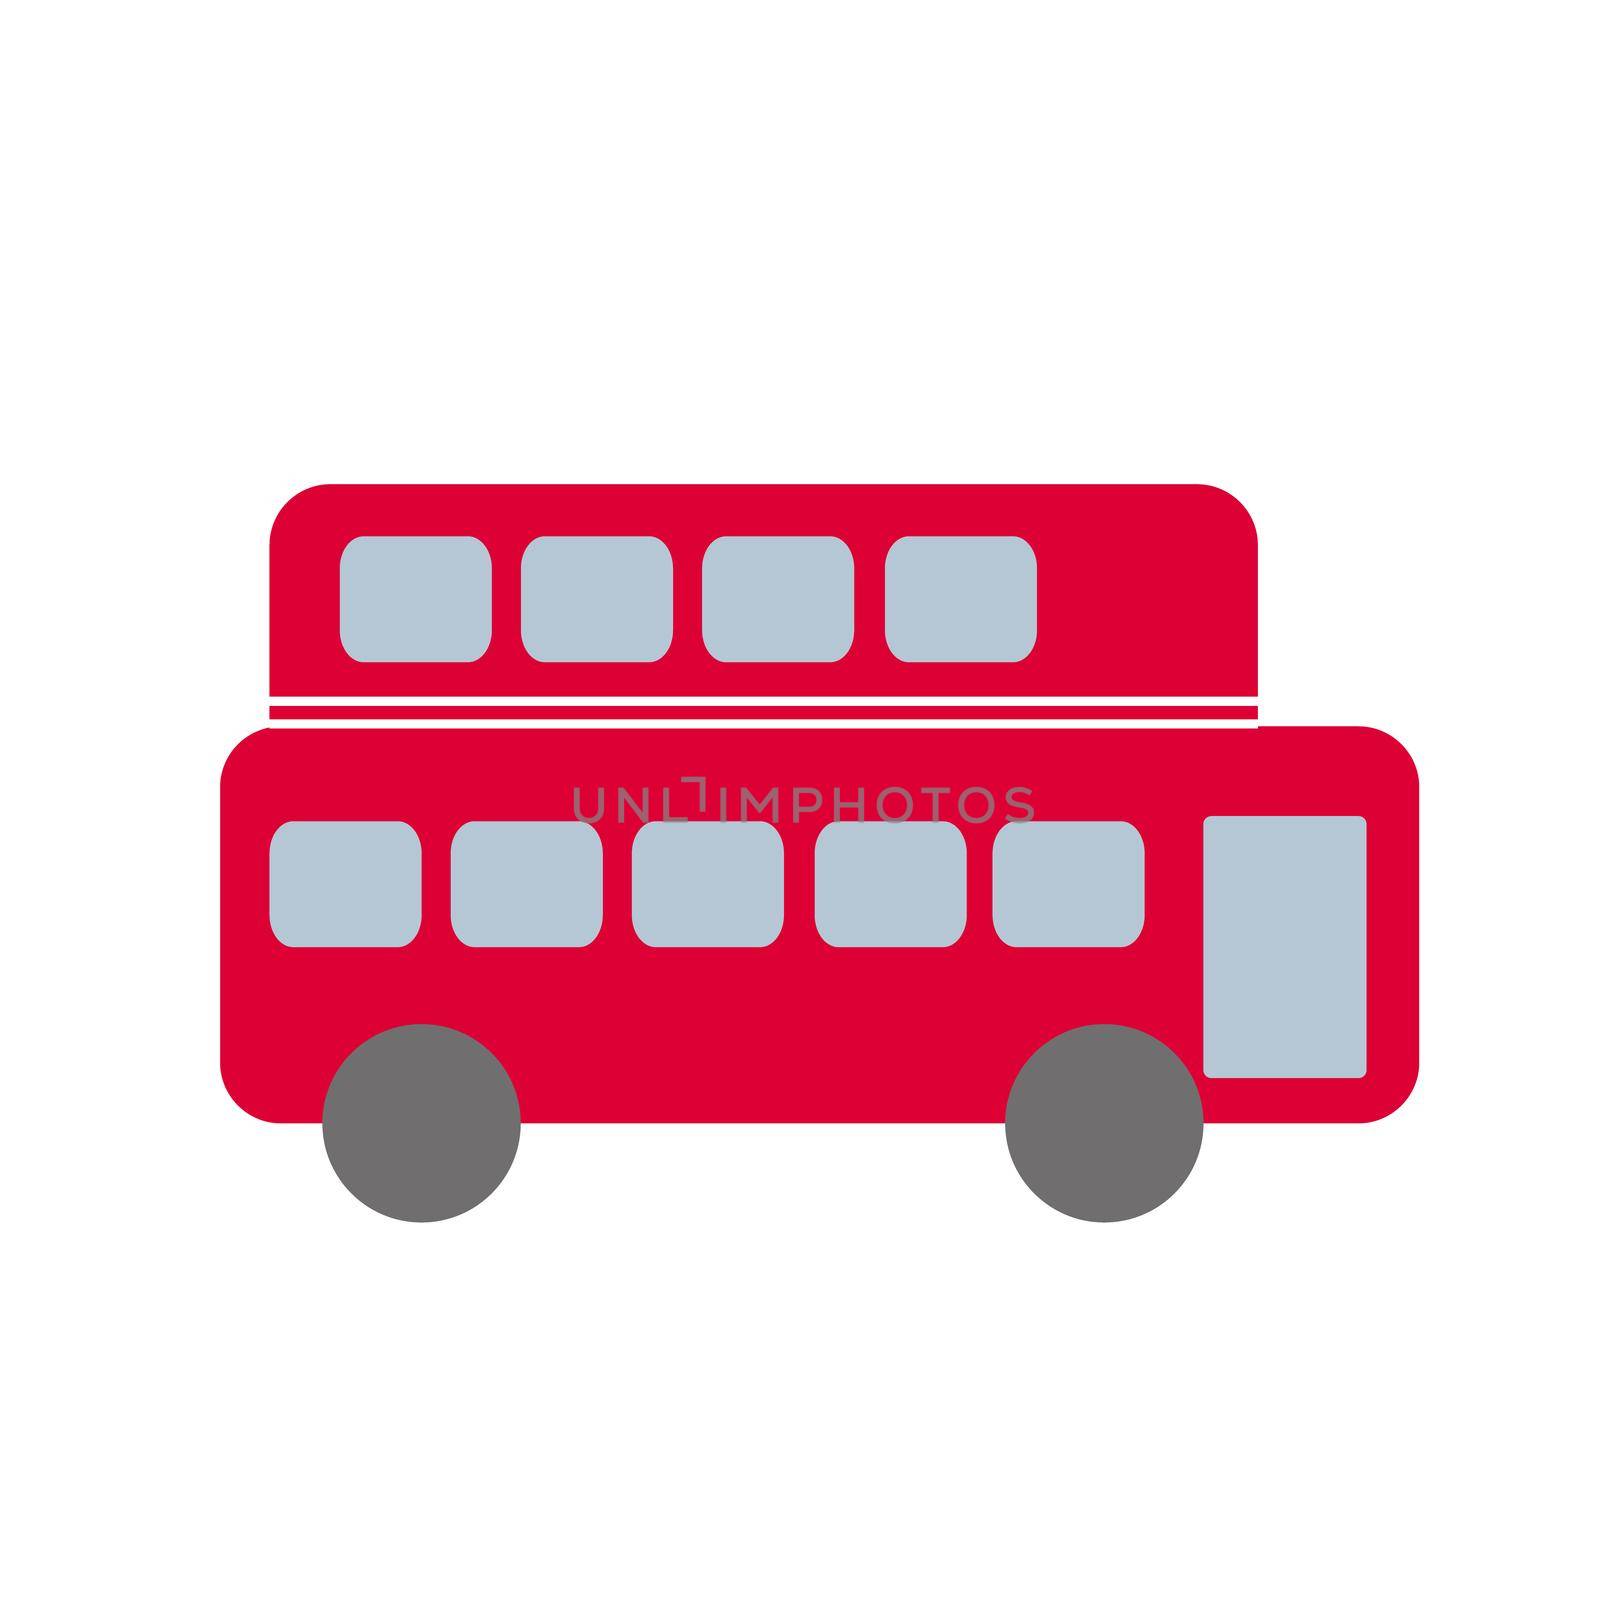 The simple design of red bus vector on white background. Simple icon